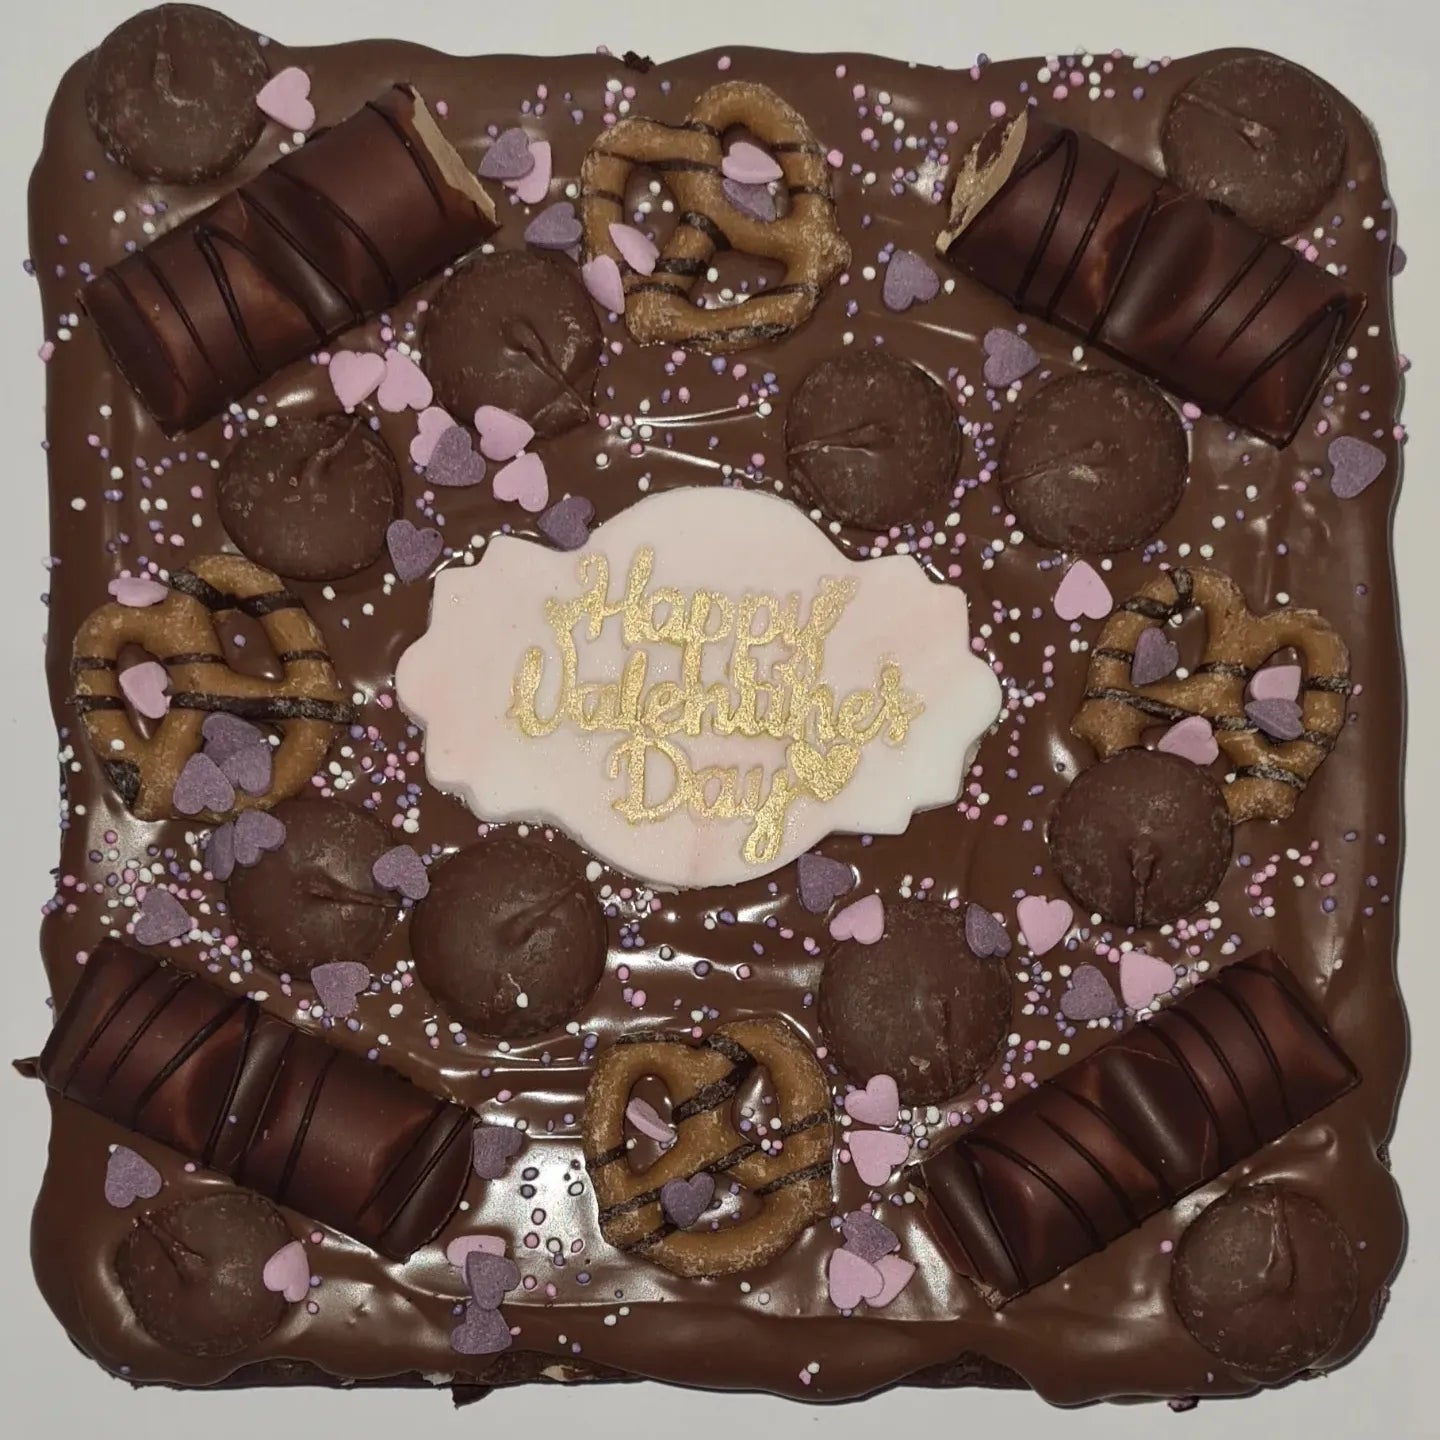 Happy valentines day brownie tray, covered with kinder bueno, pretzels, chocolate buttons and icing!